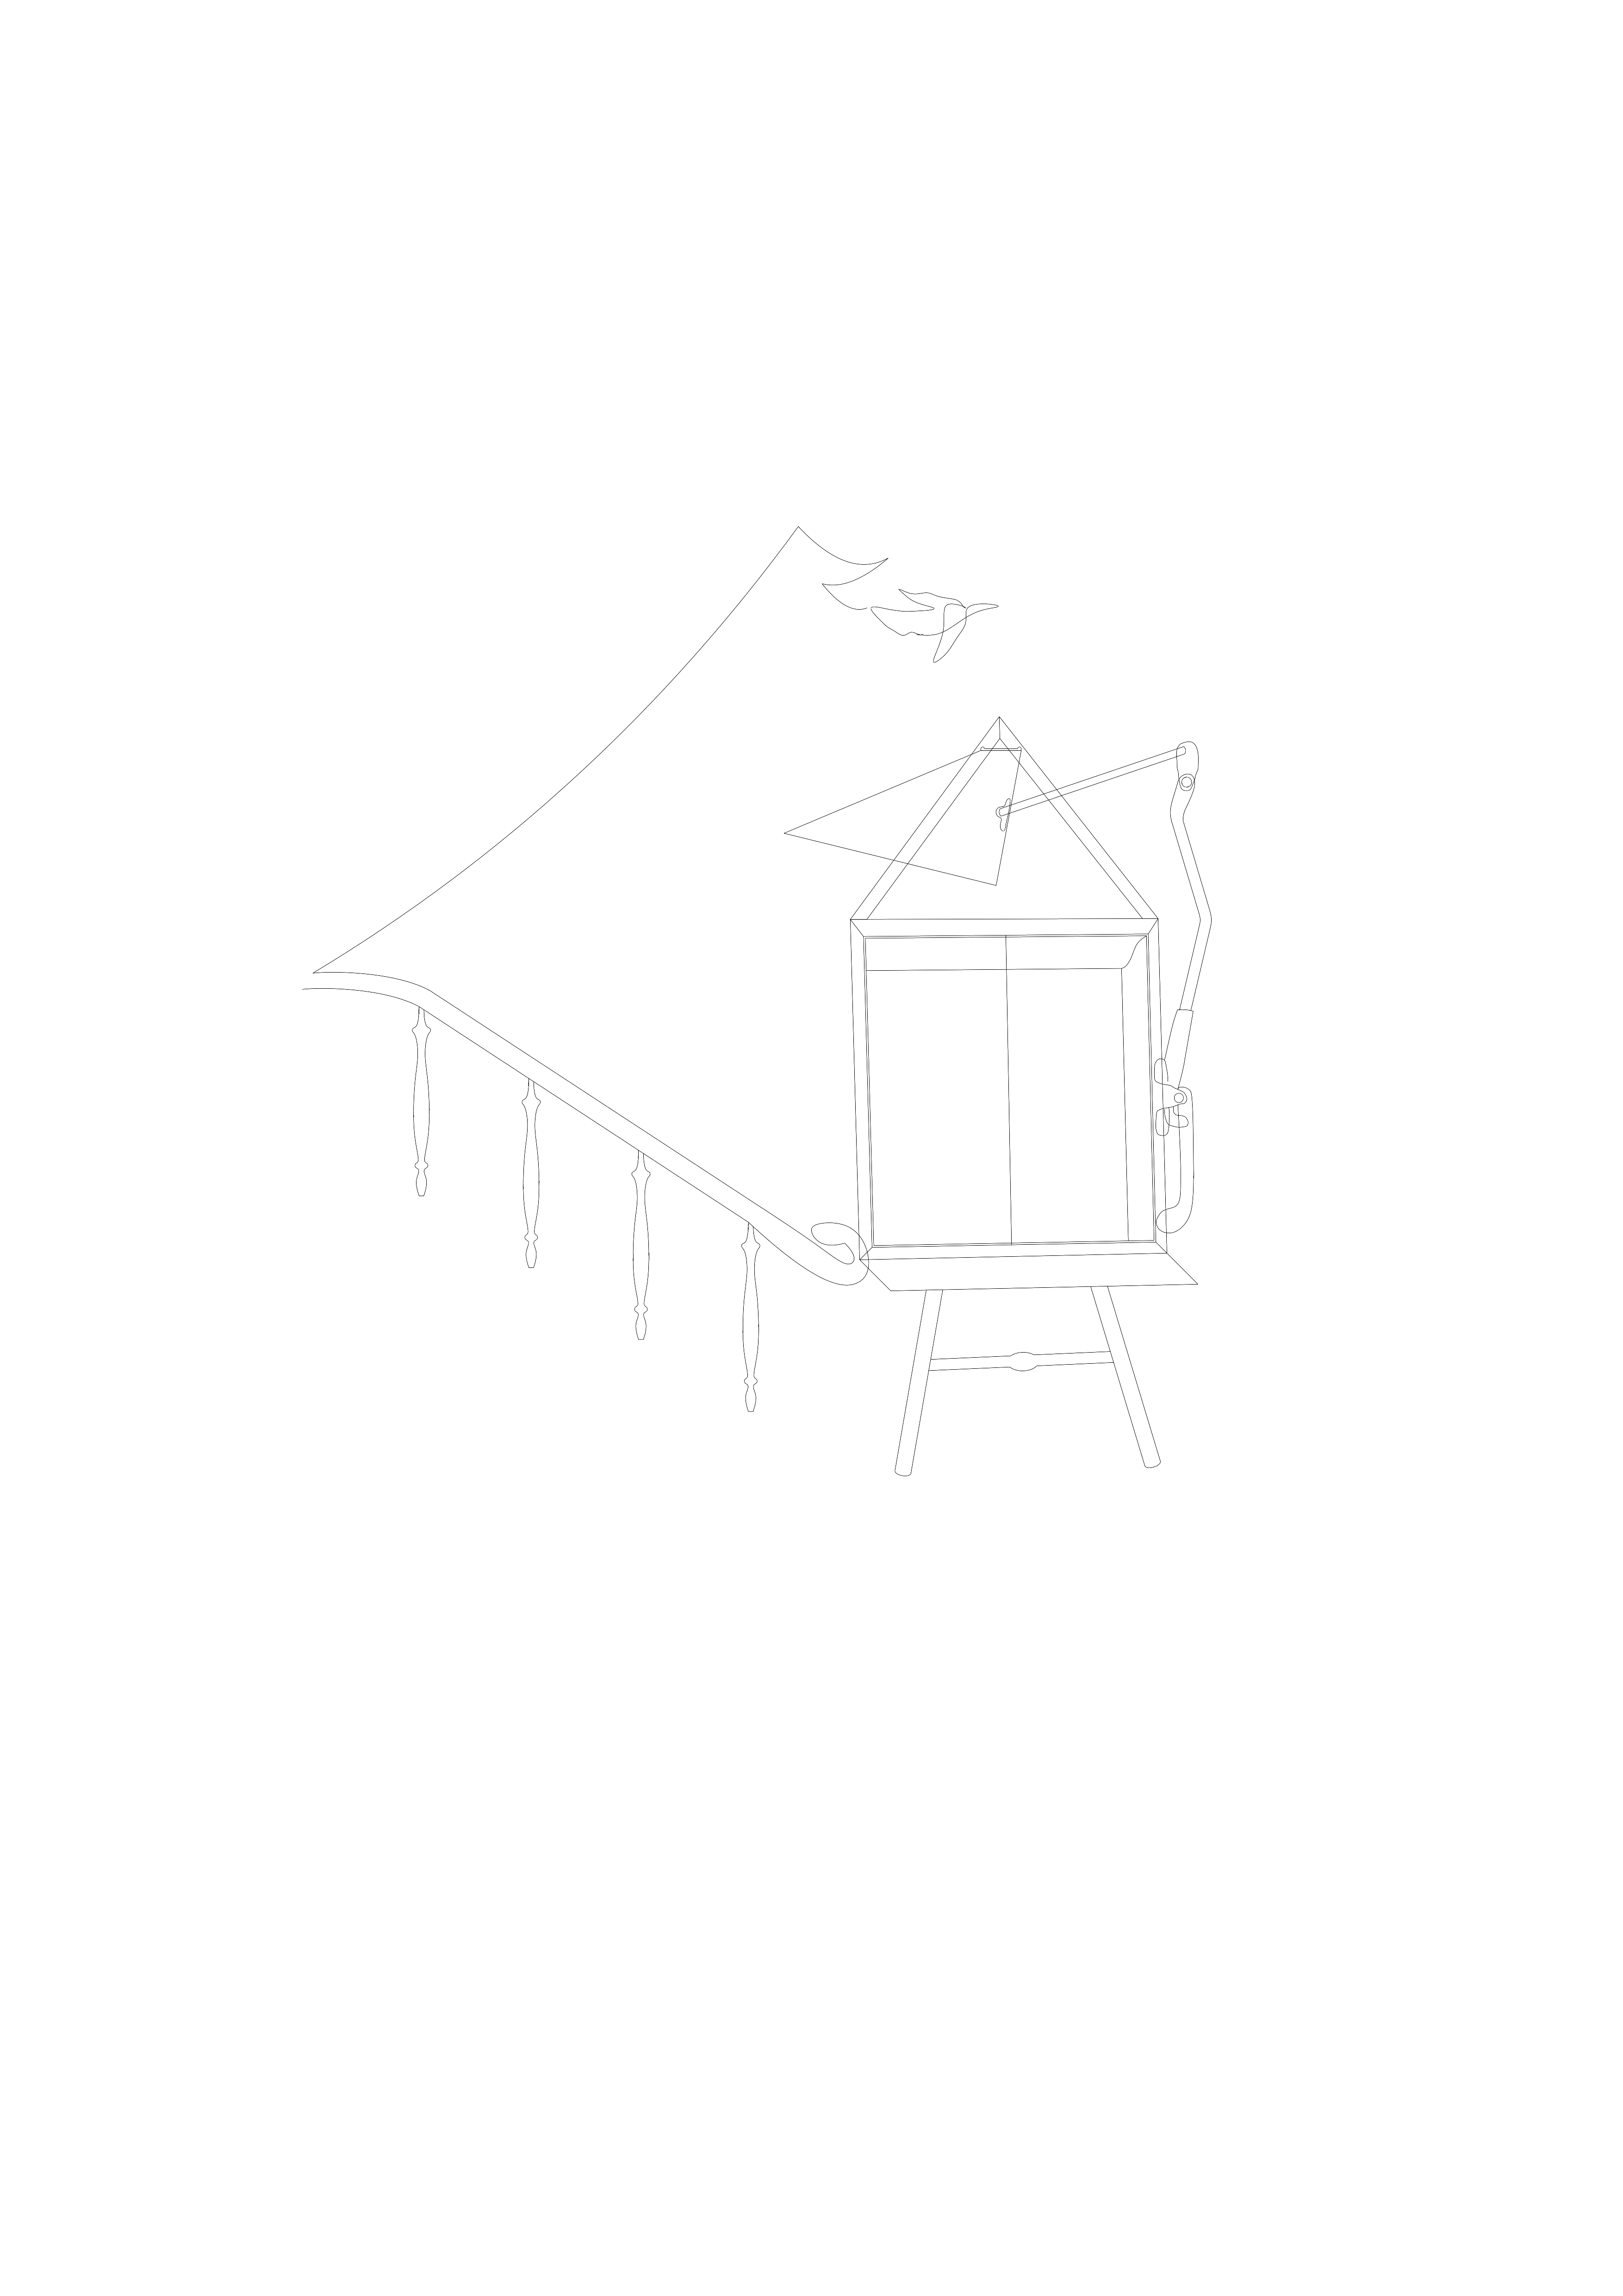 digital line drawing of a window with operable handle, sitting on two legs, a balustrade sloping up to the left, and a bird in the background carrying a string